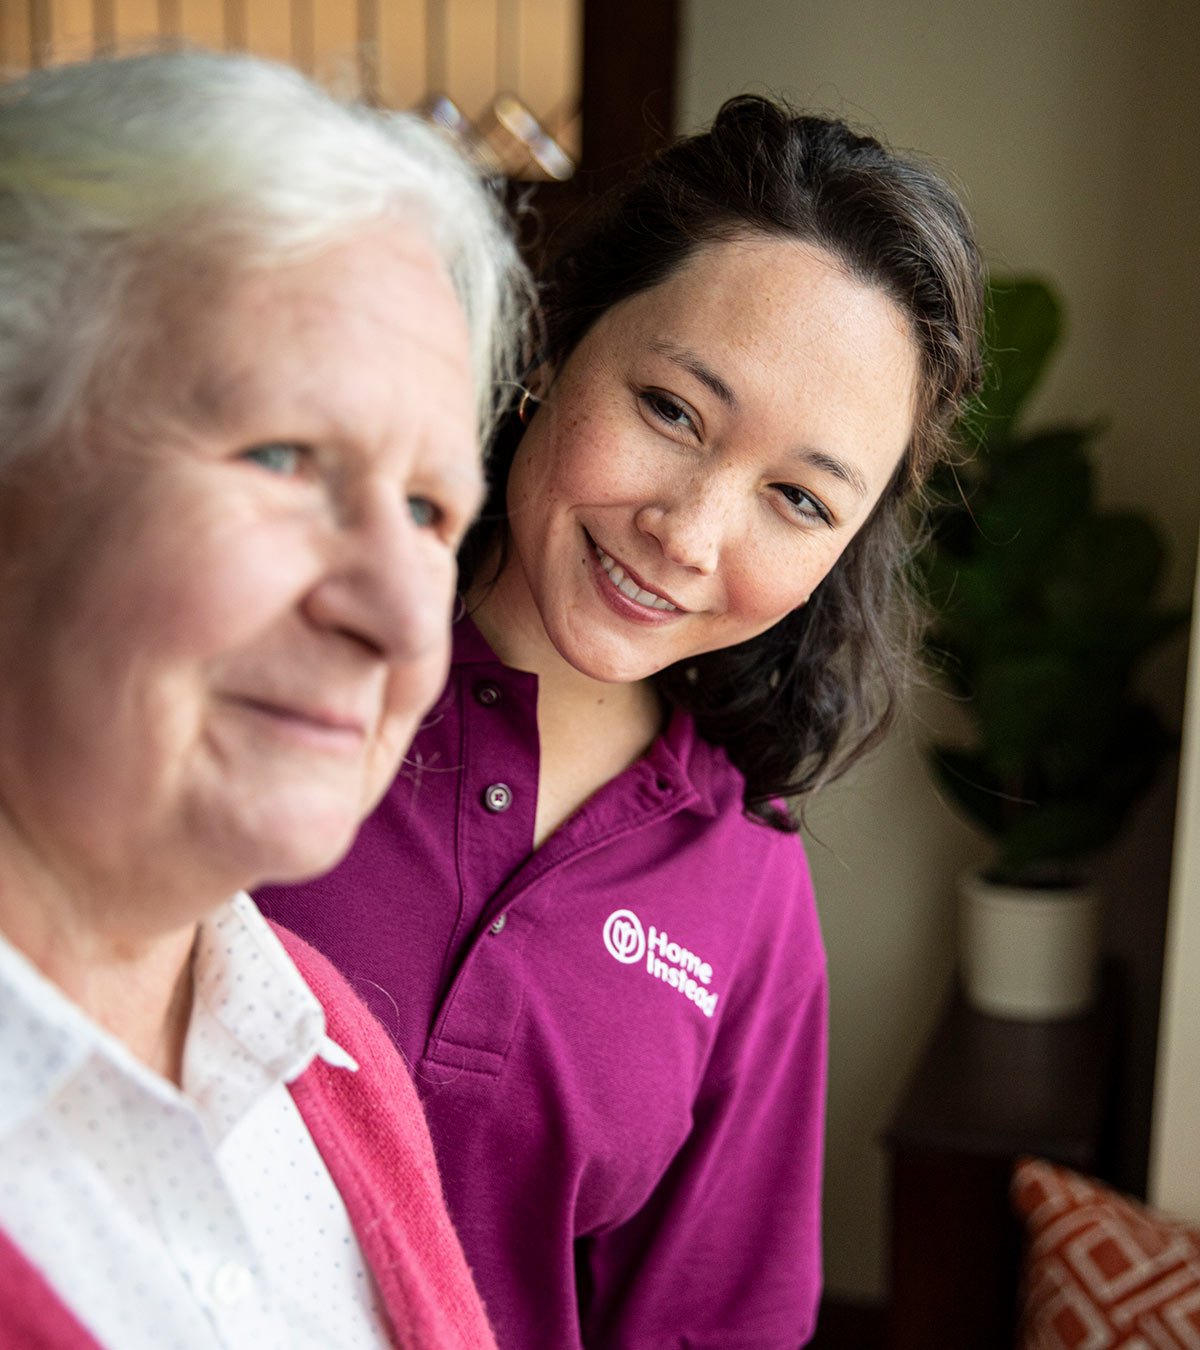 Elderly Care Services for Help at Home